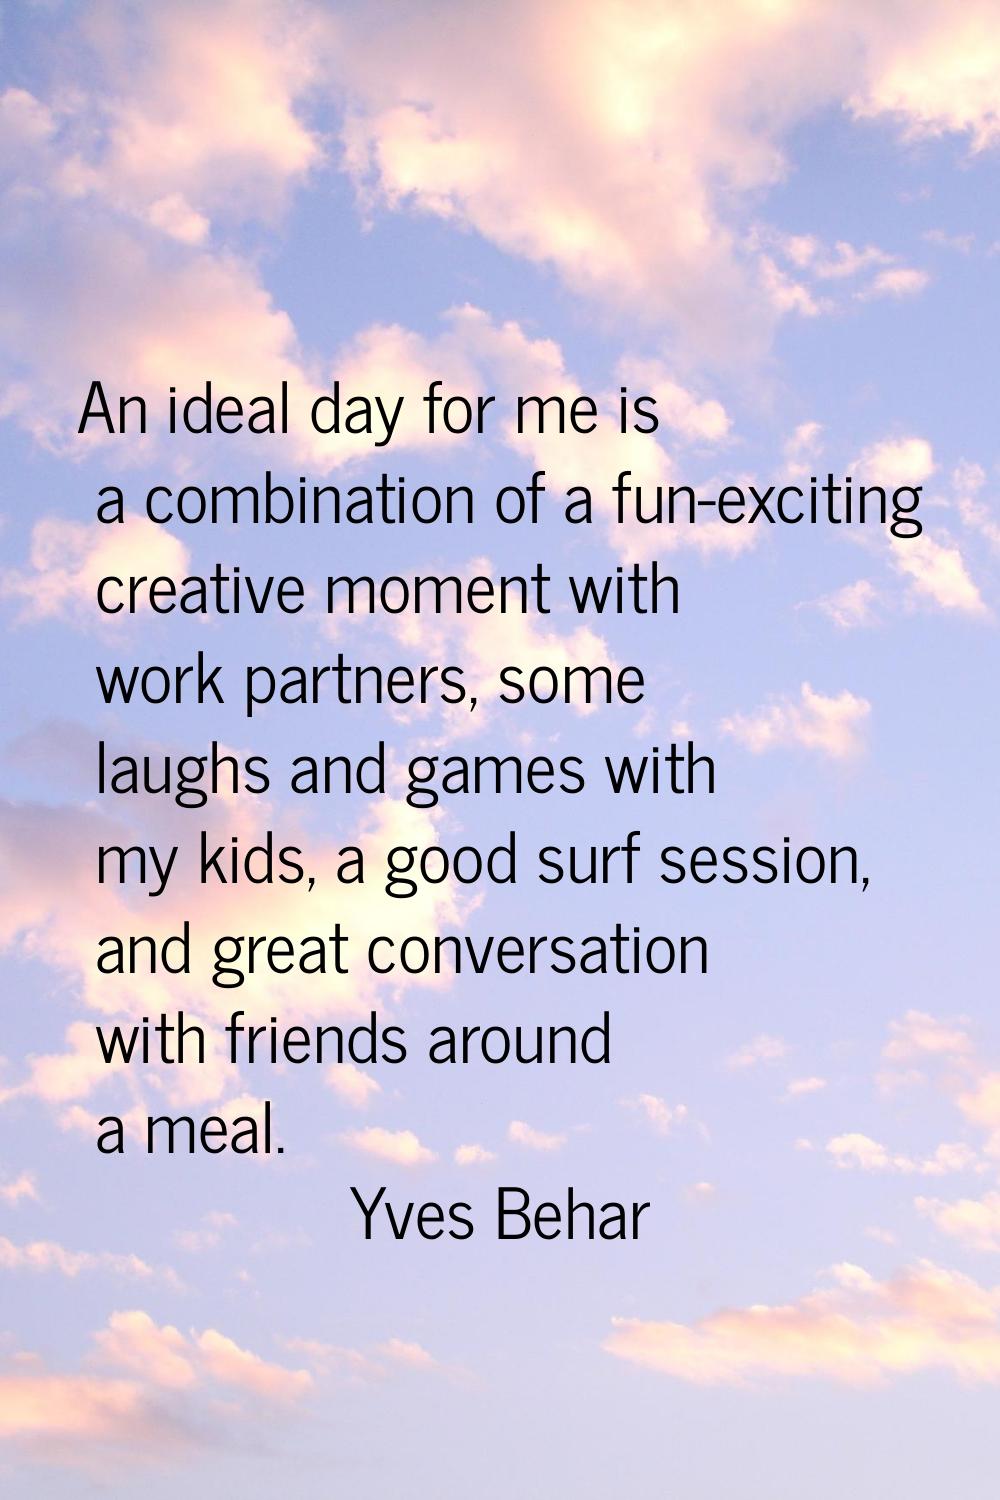 An ideal day for me is a combination of a fun-exciting creative moment with work partners, some lau